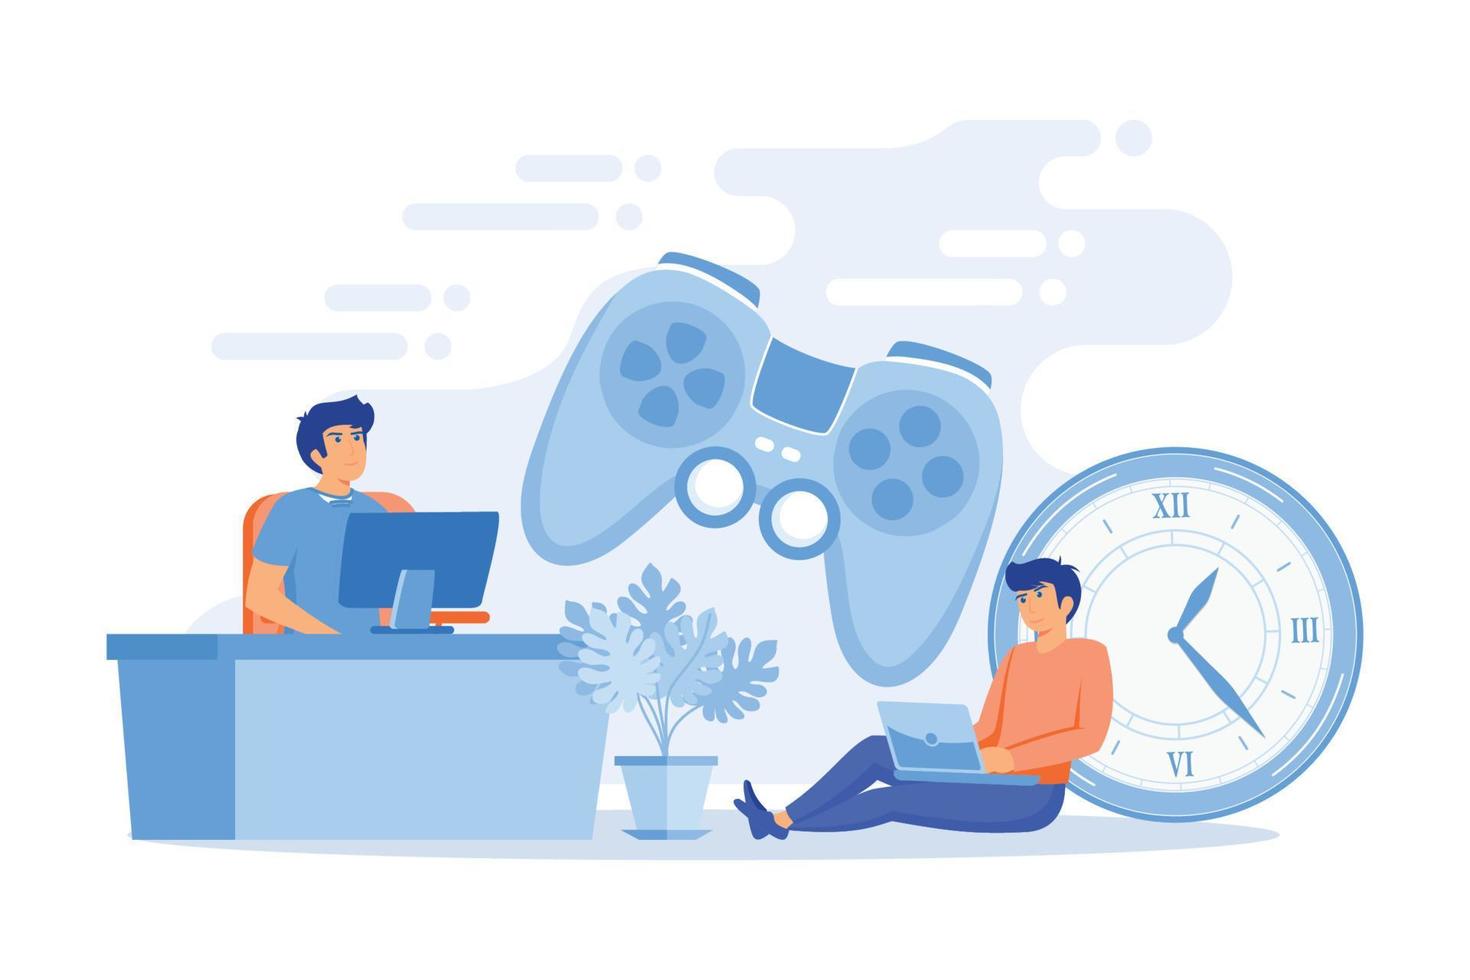 Tiny people gamers playing online video game, huge joystick and clock. Gaming disorder, video gaming addiction, decreased attention span concept. flat vector modern illustration